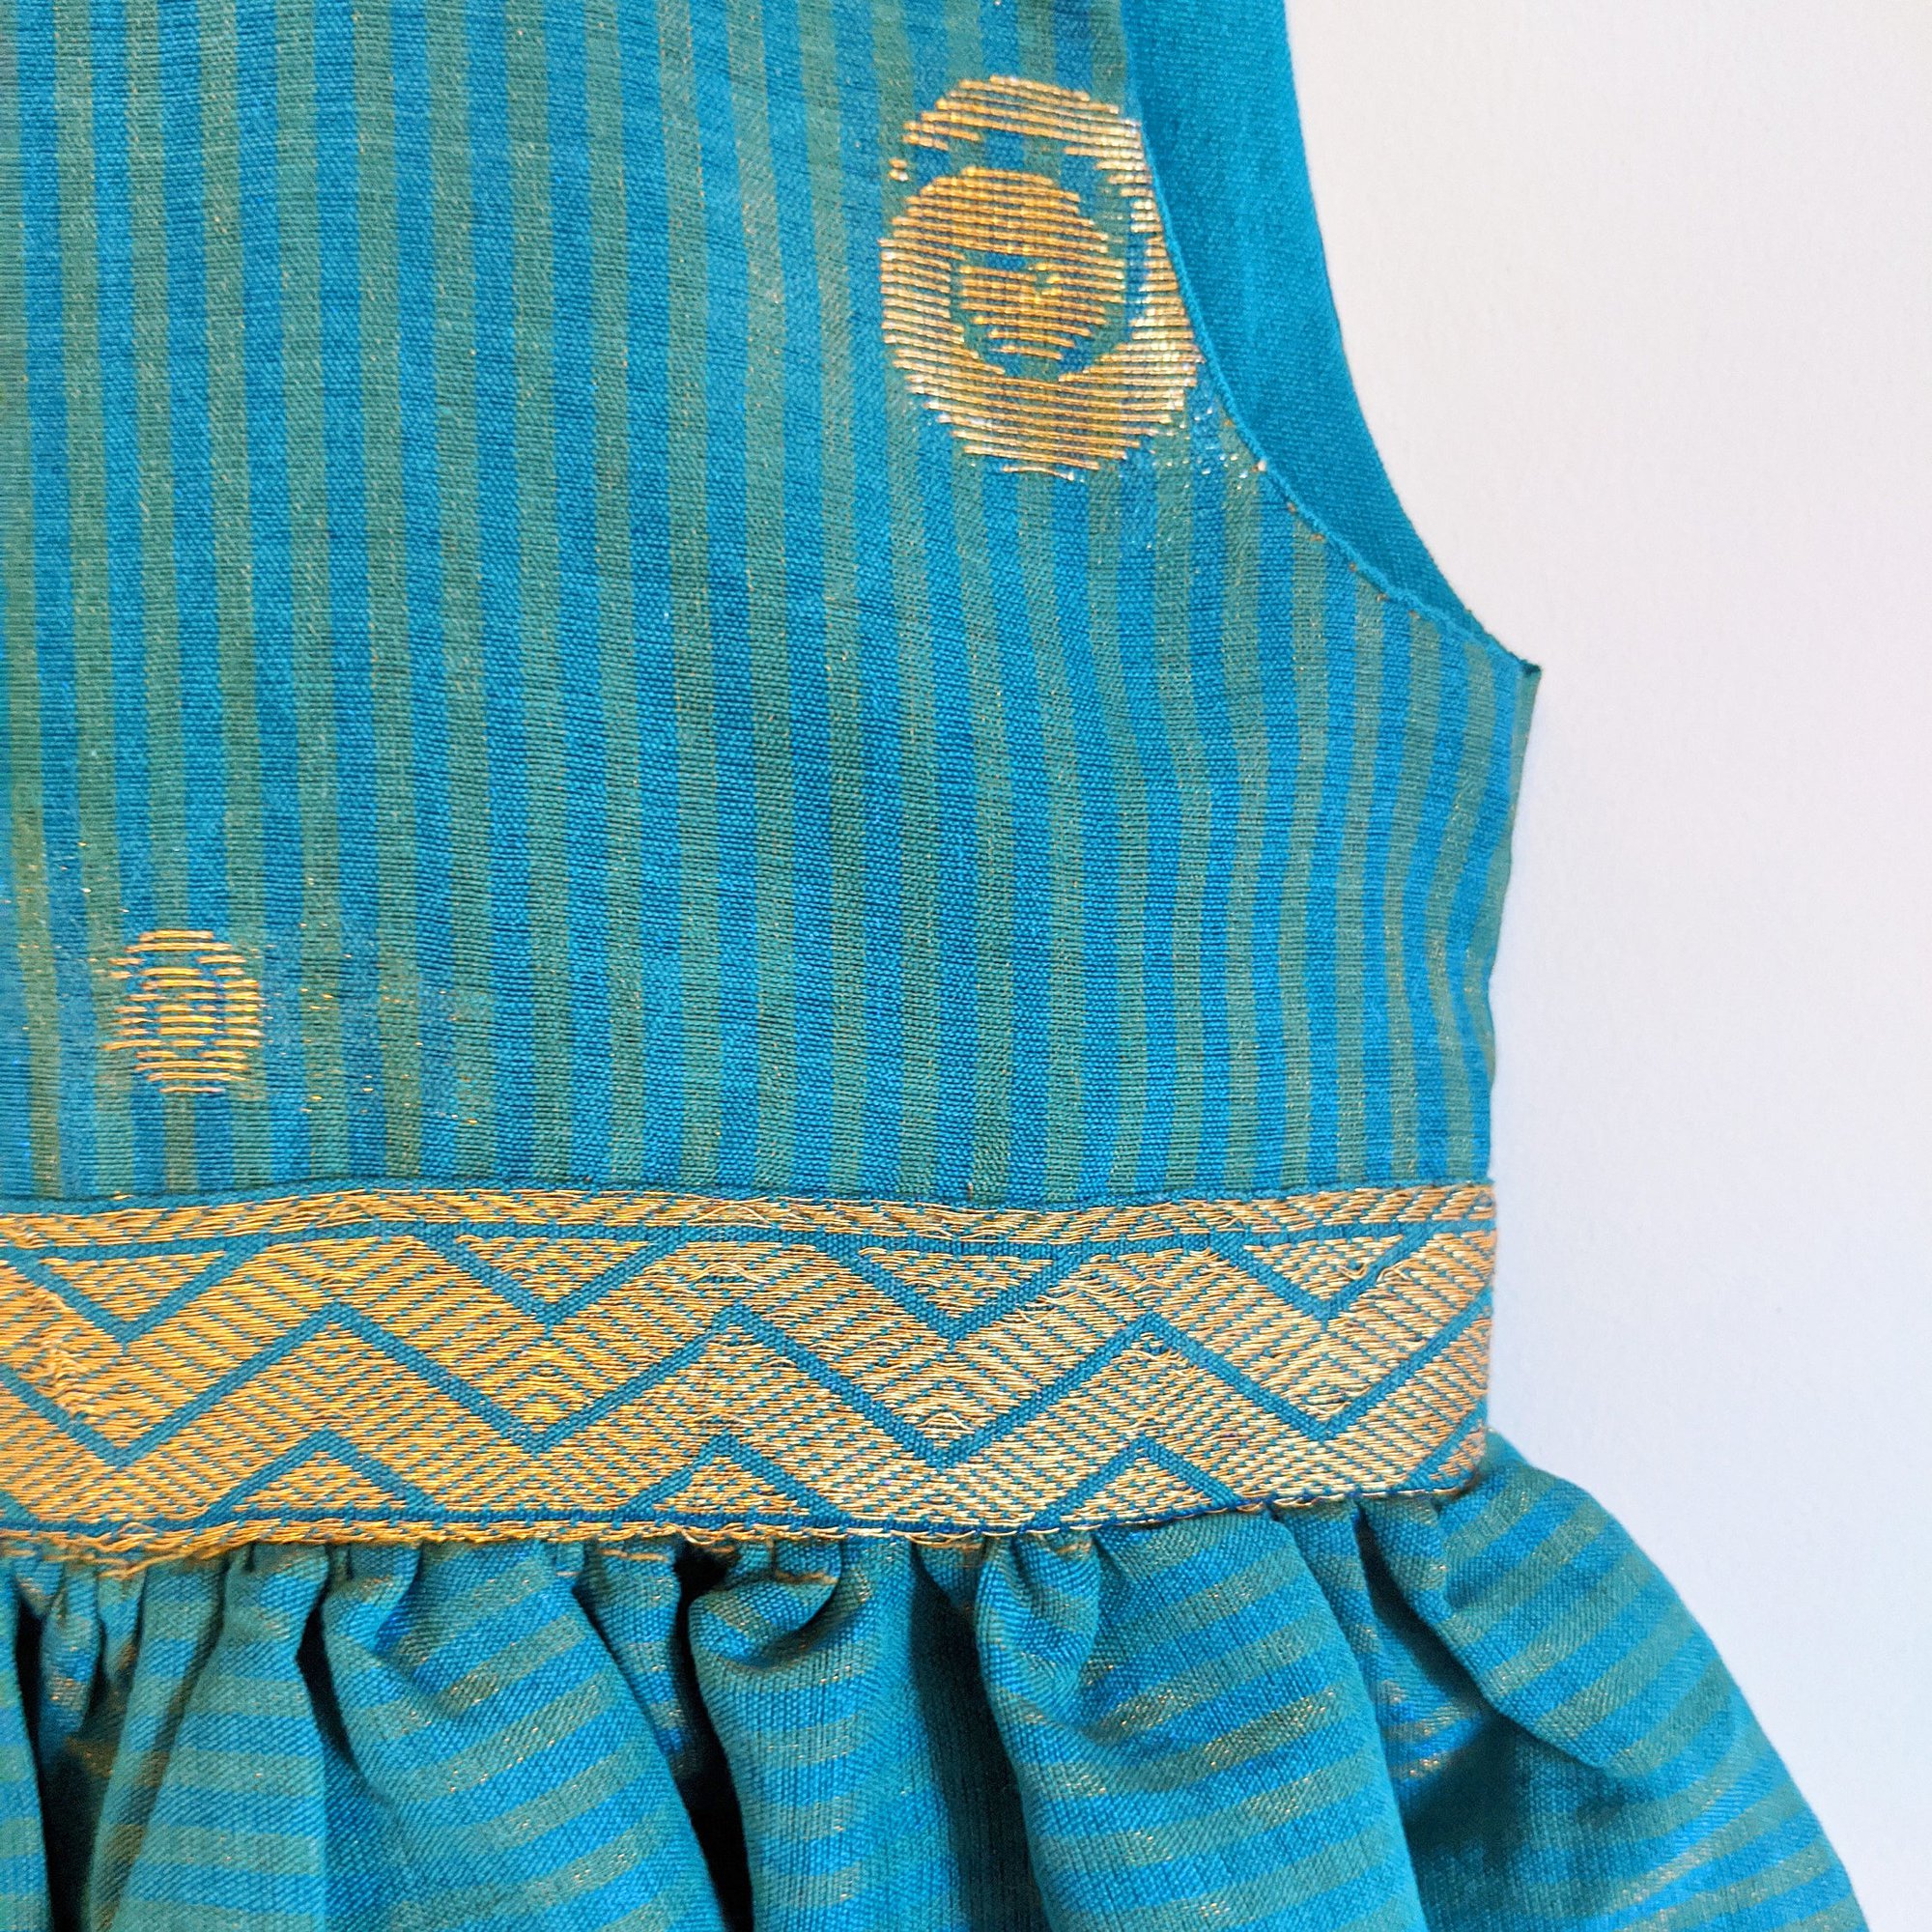 Teal Party Dress For Ages 5-6 Years - 5-6